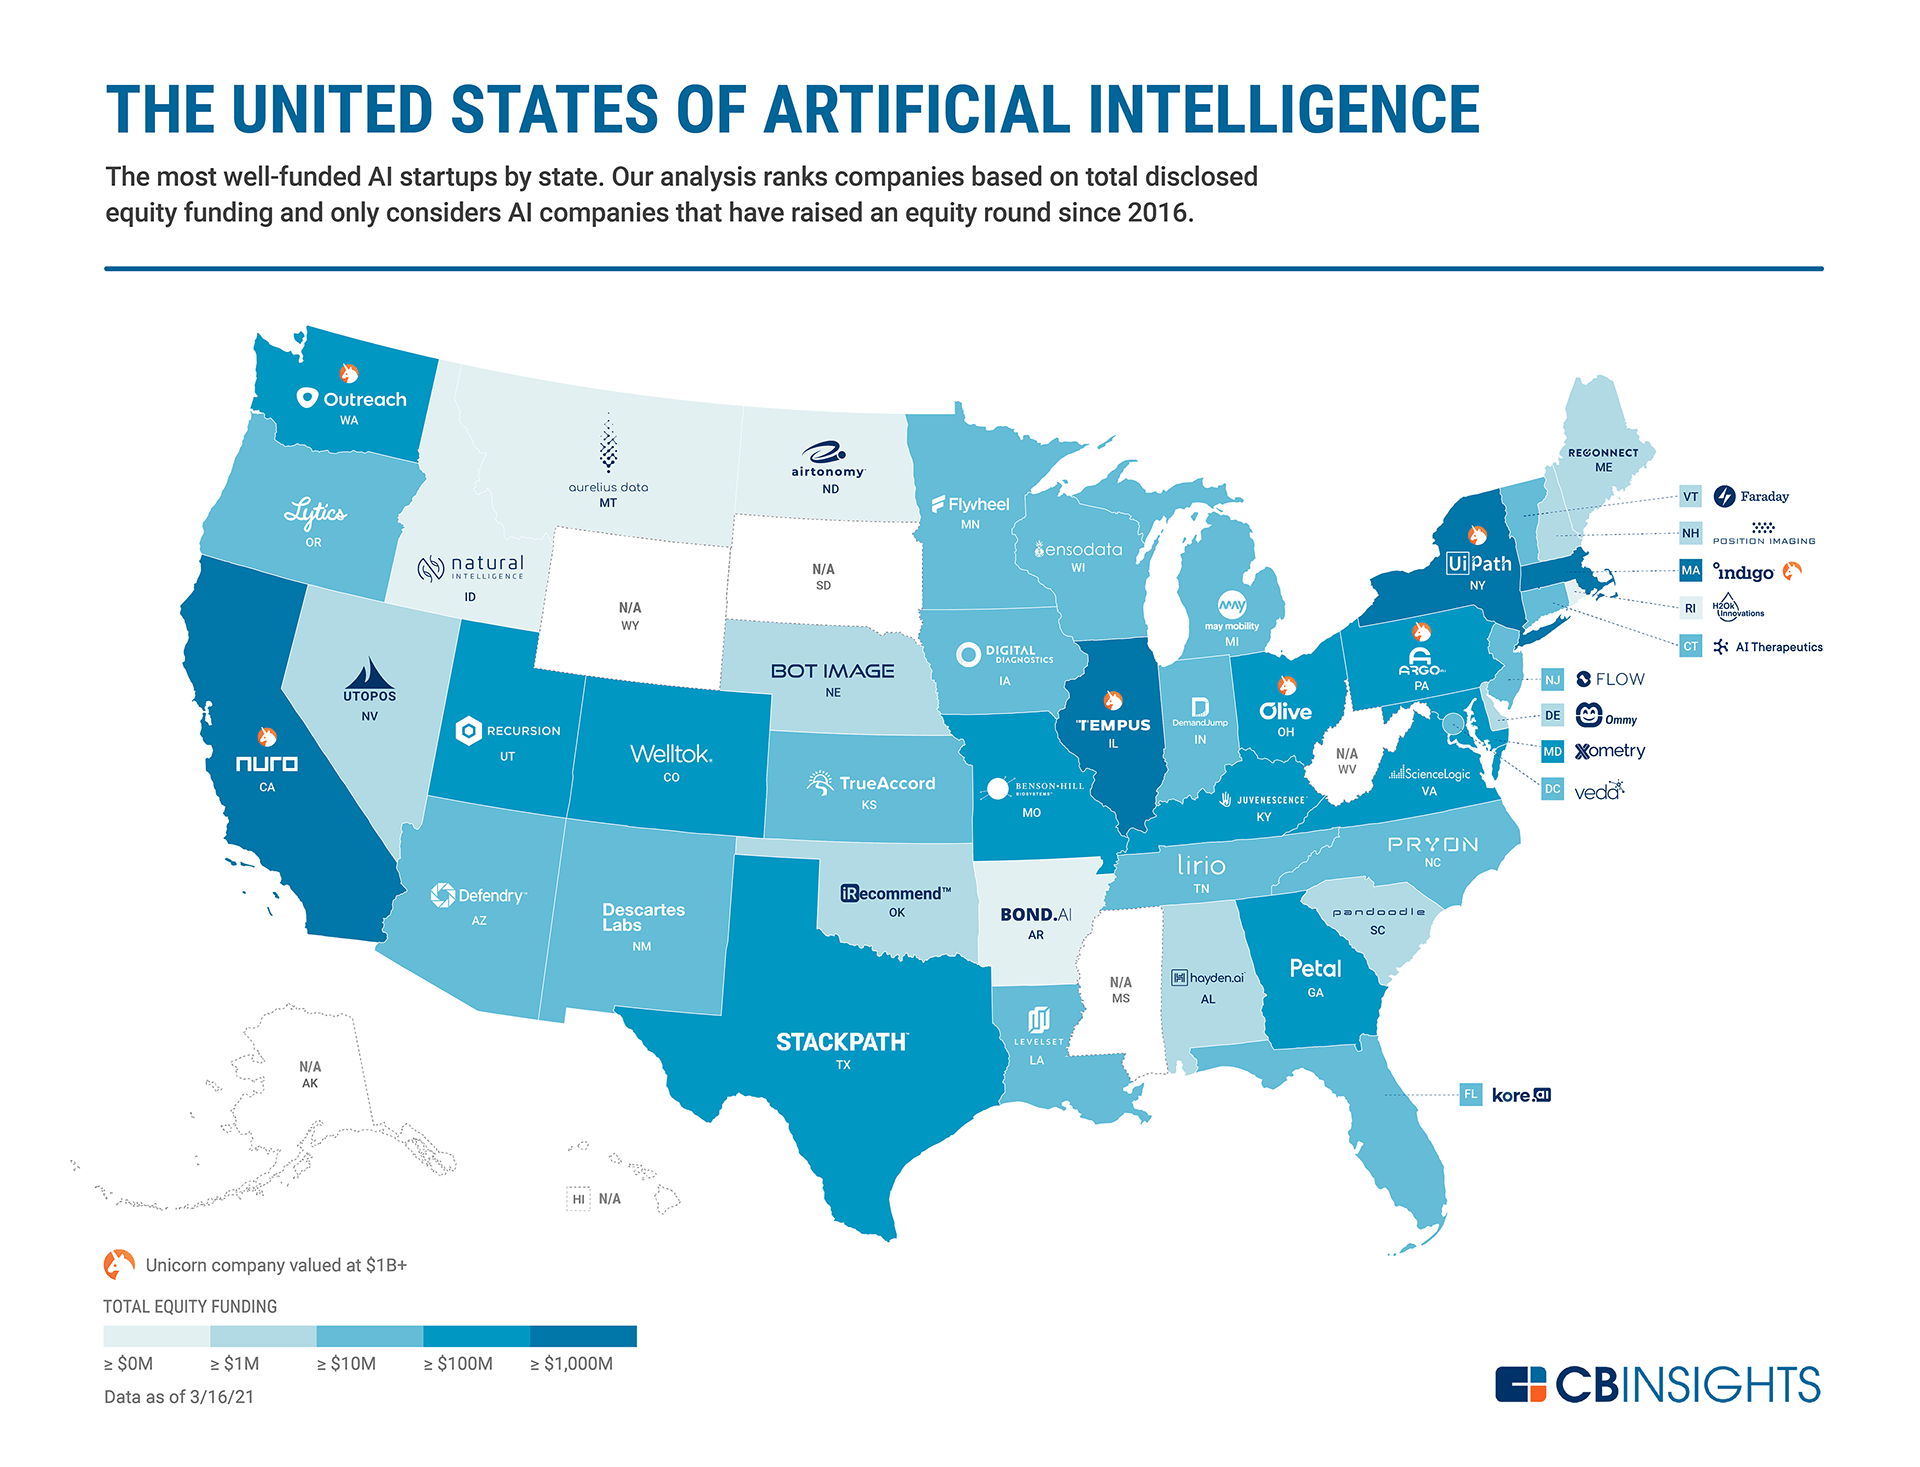 The United States of Artificial Intelligence